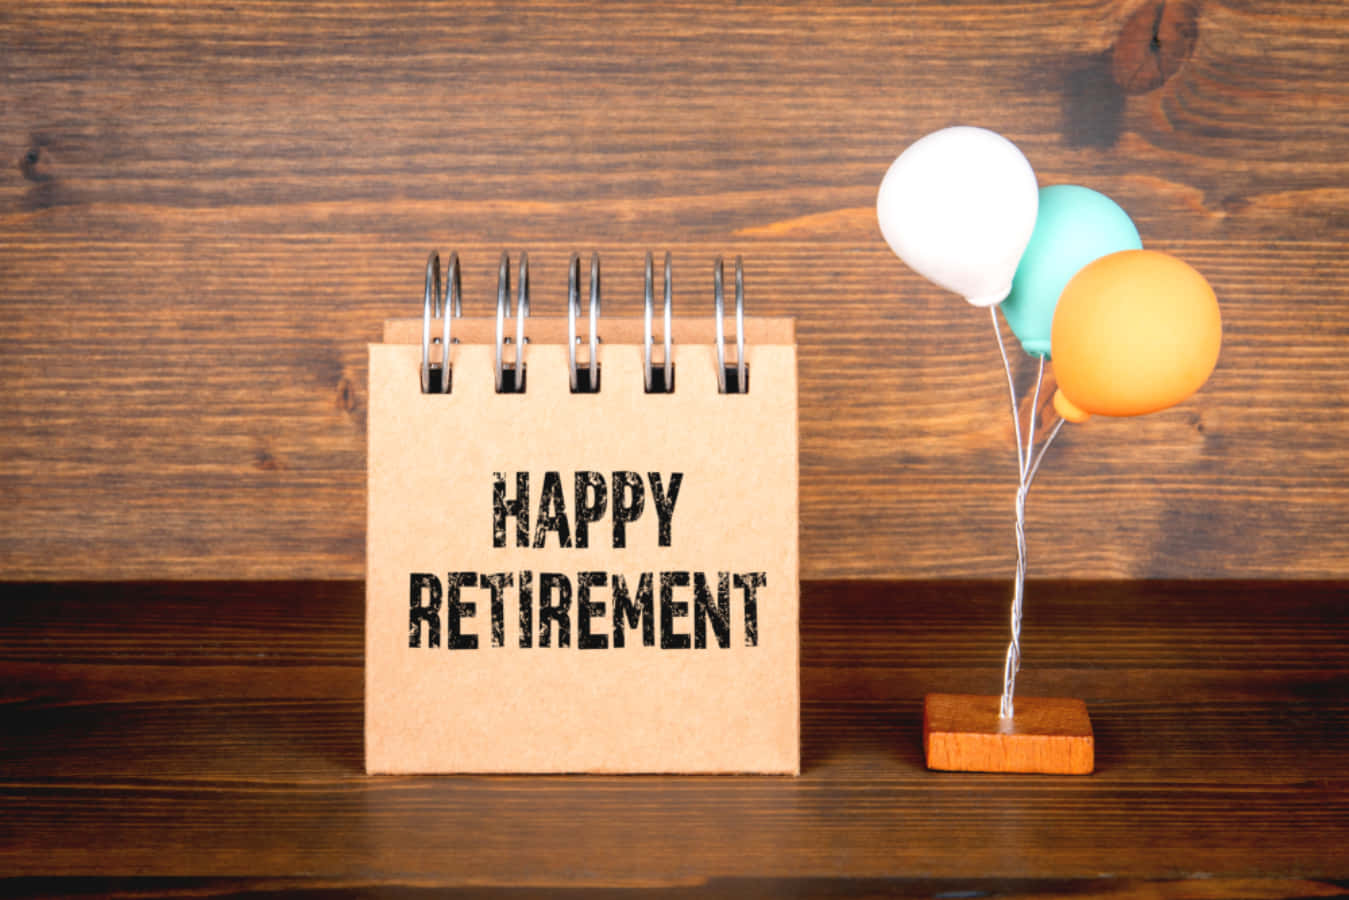 Happy Retirement Note With Balloons On Wooden Background